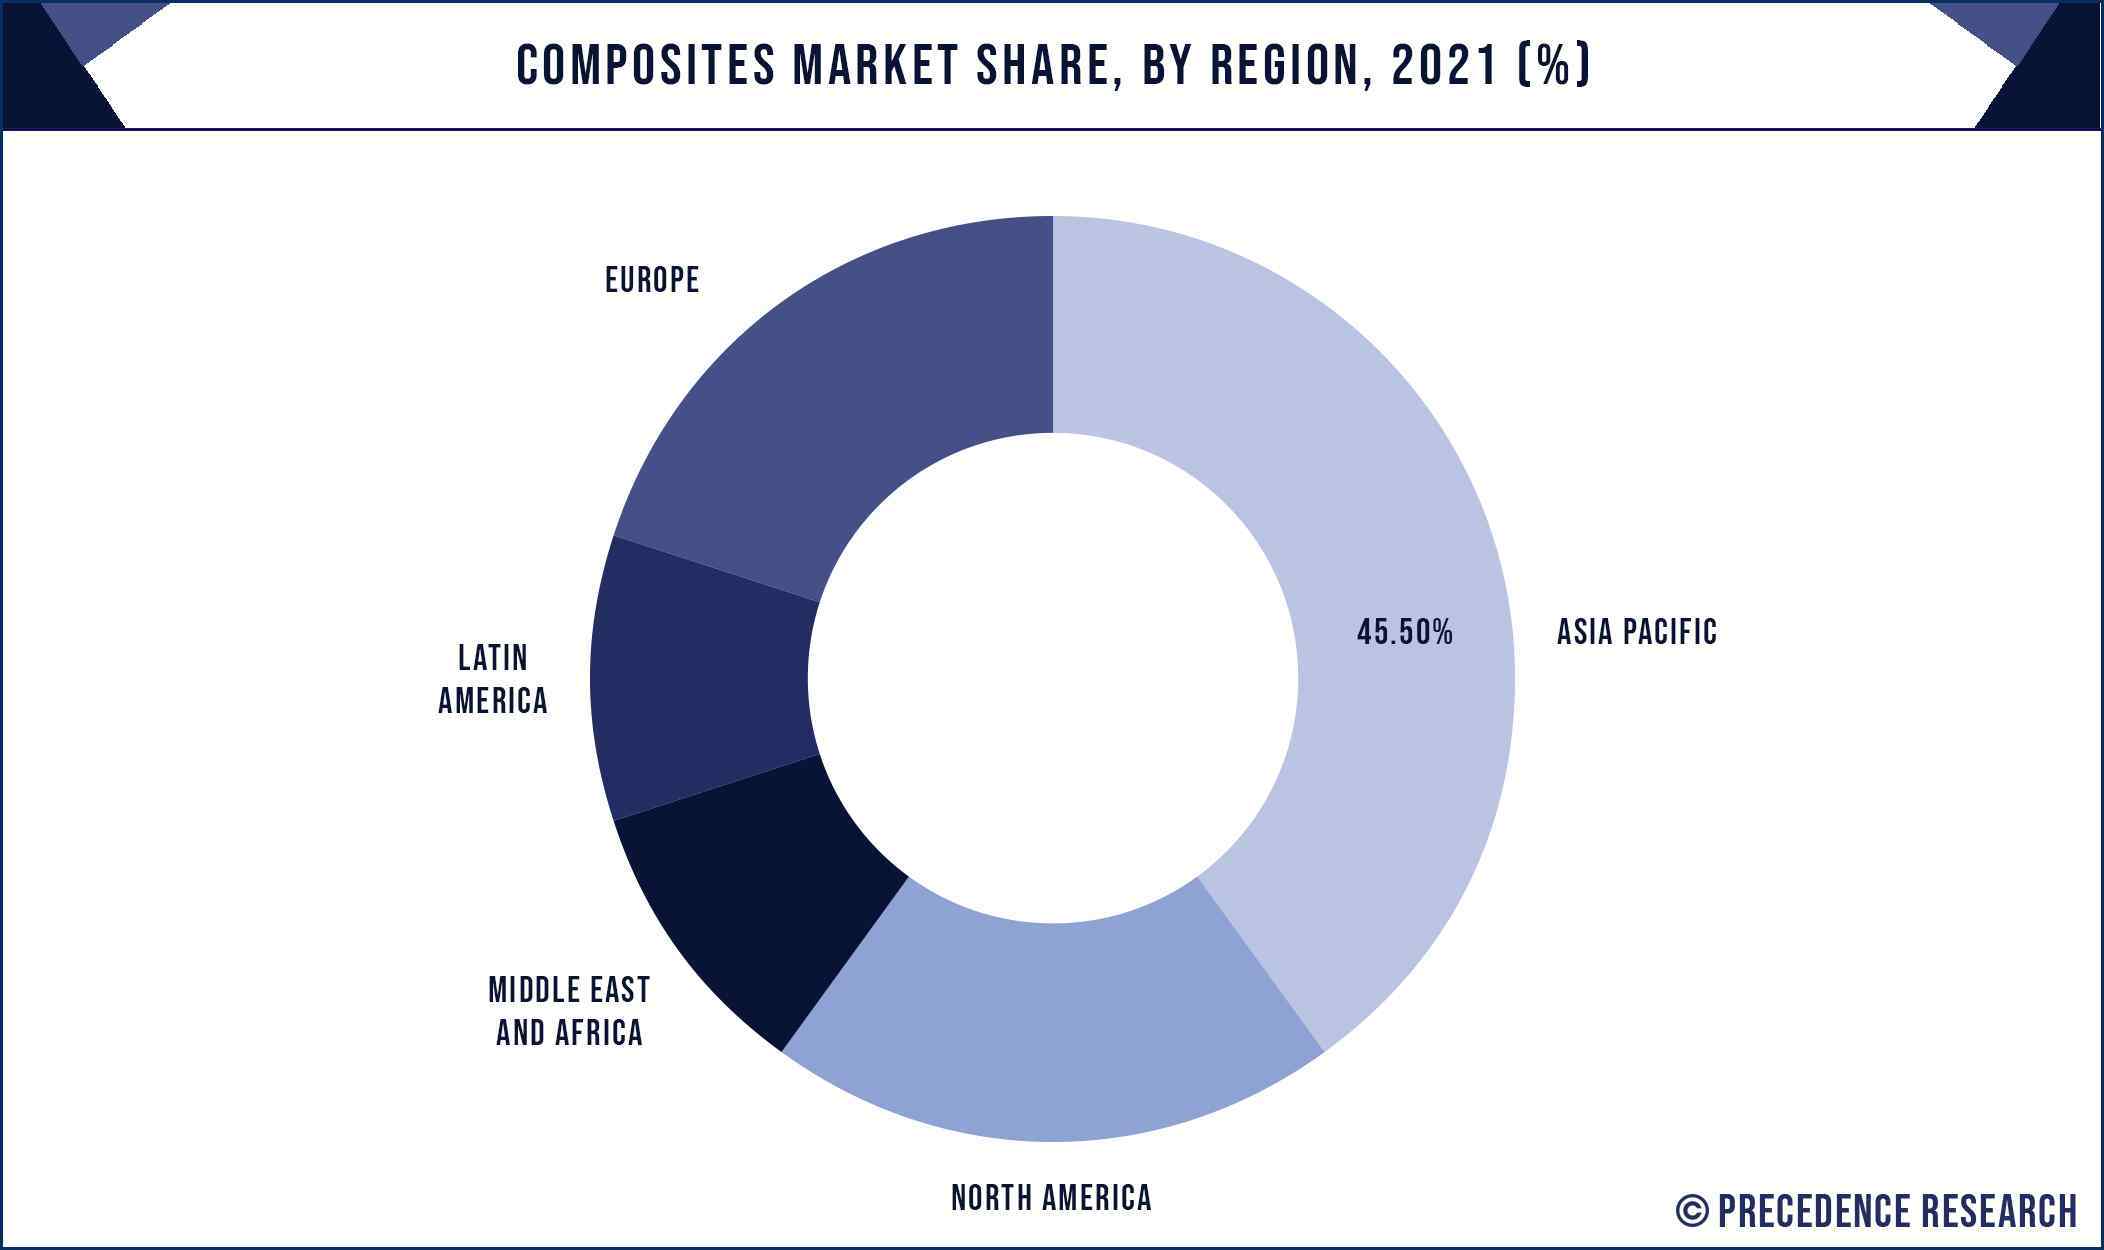 Composites Market Share, By Region, 2021 (%)